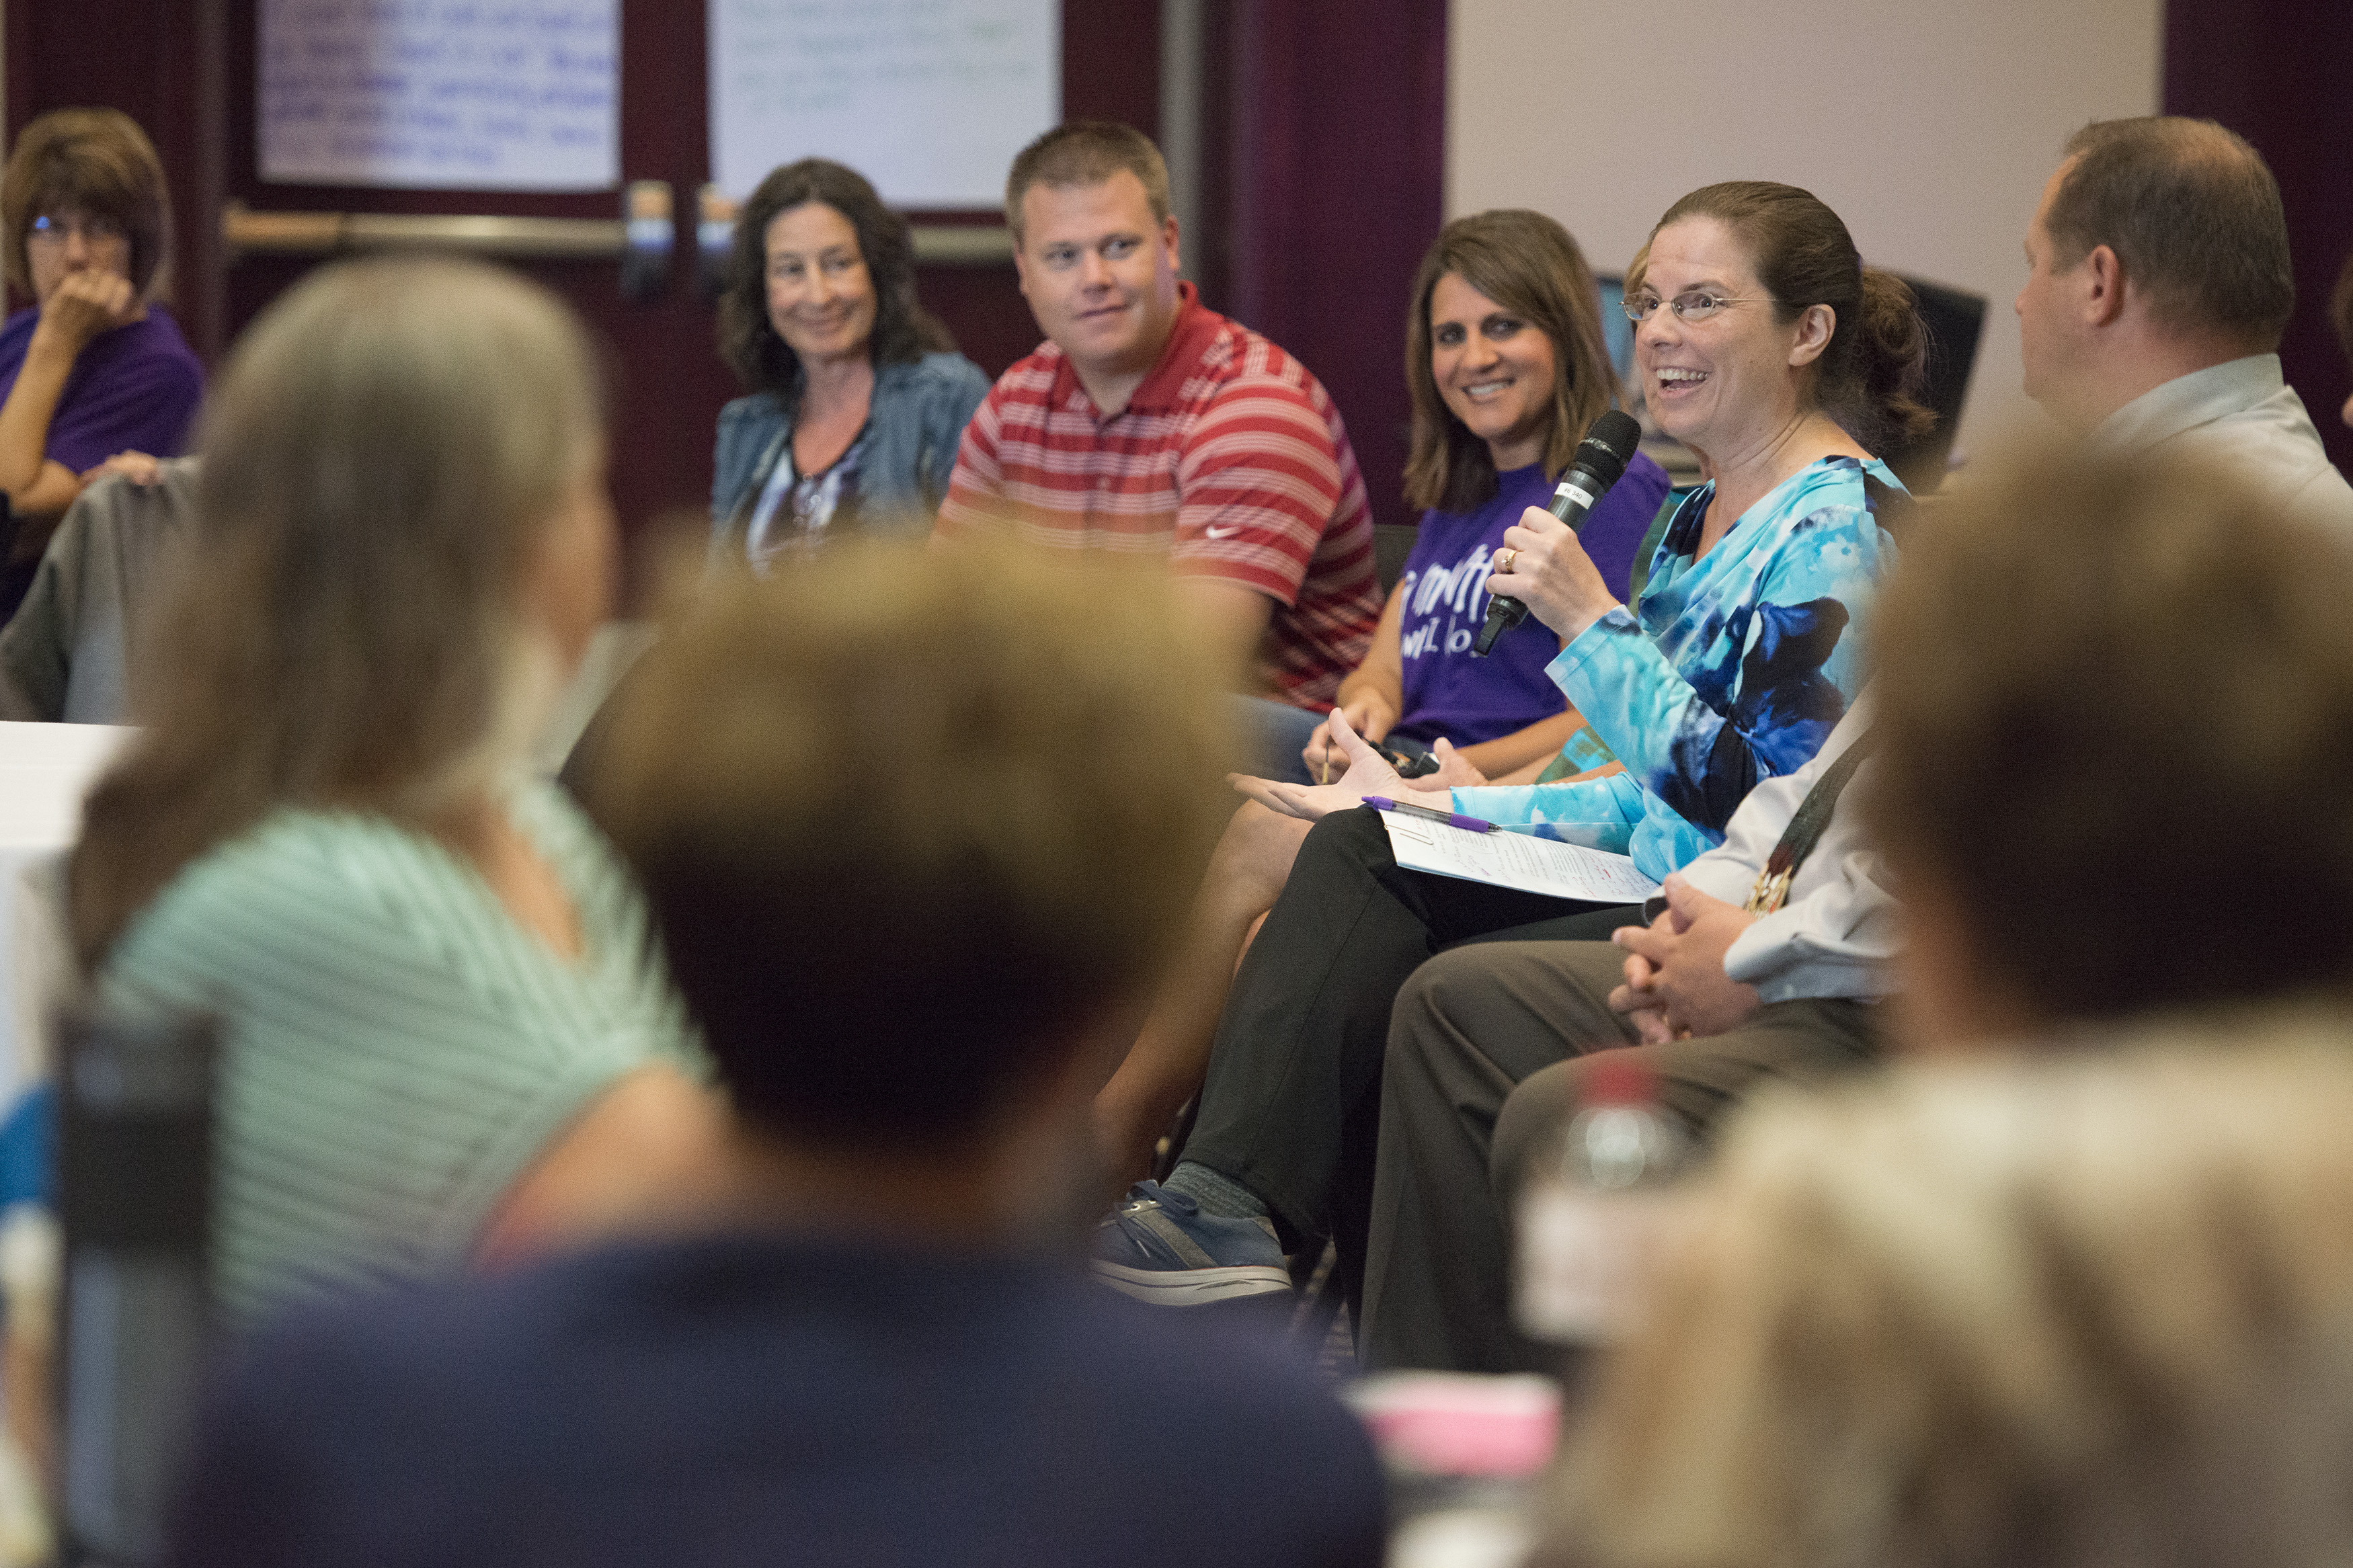 Education professionals from the Augusta and Cornell school districts participate in a workshop led by UW-Eau Claire education studies faculty. The workshop is part of a three-year program supported by a UW System Improving Teacher Quality grant.